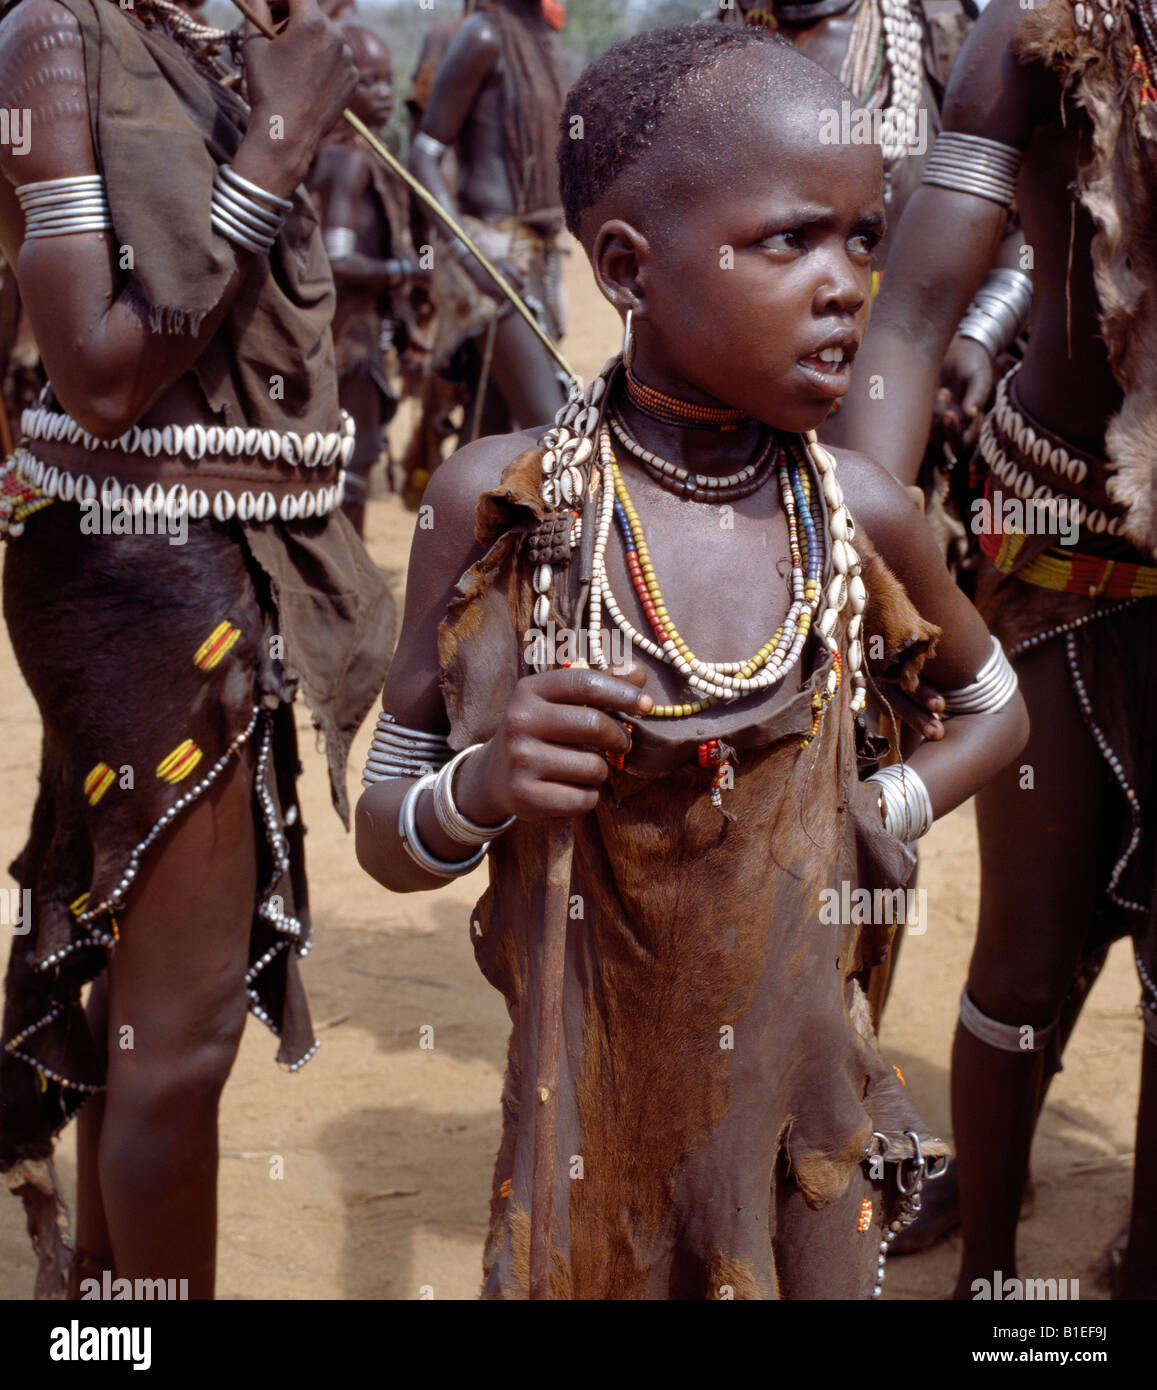 A young Hamar girl watches the proceedings during during a 'Jumping of the Bull' ceremony. Stock Photo